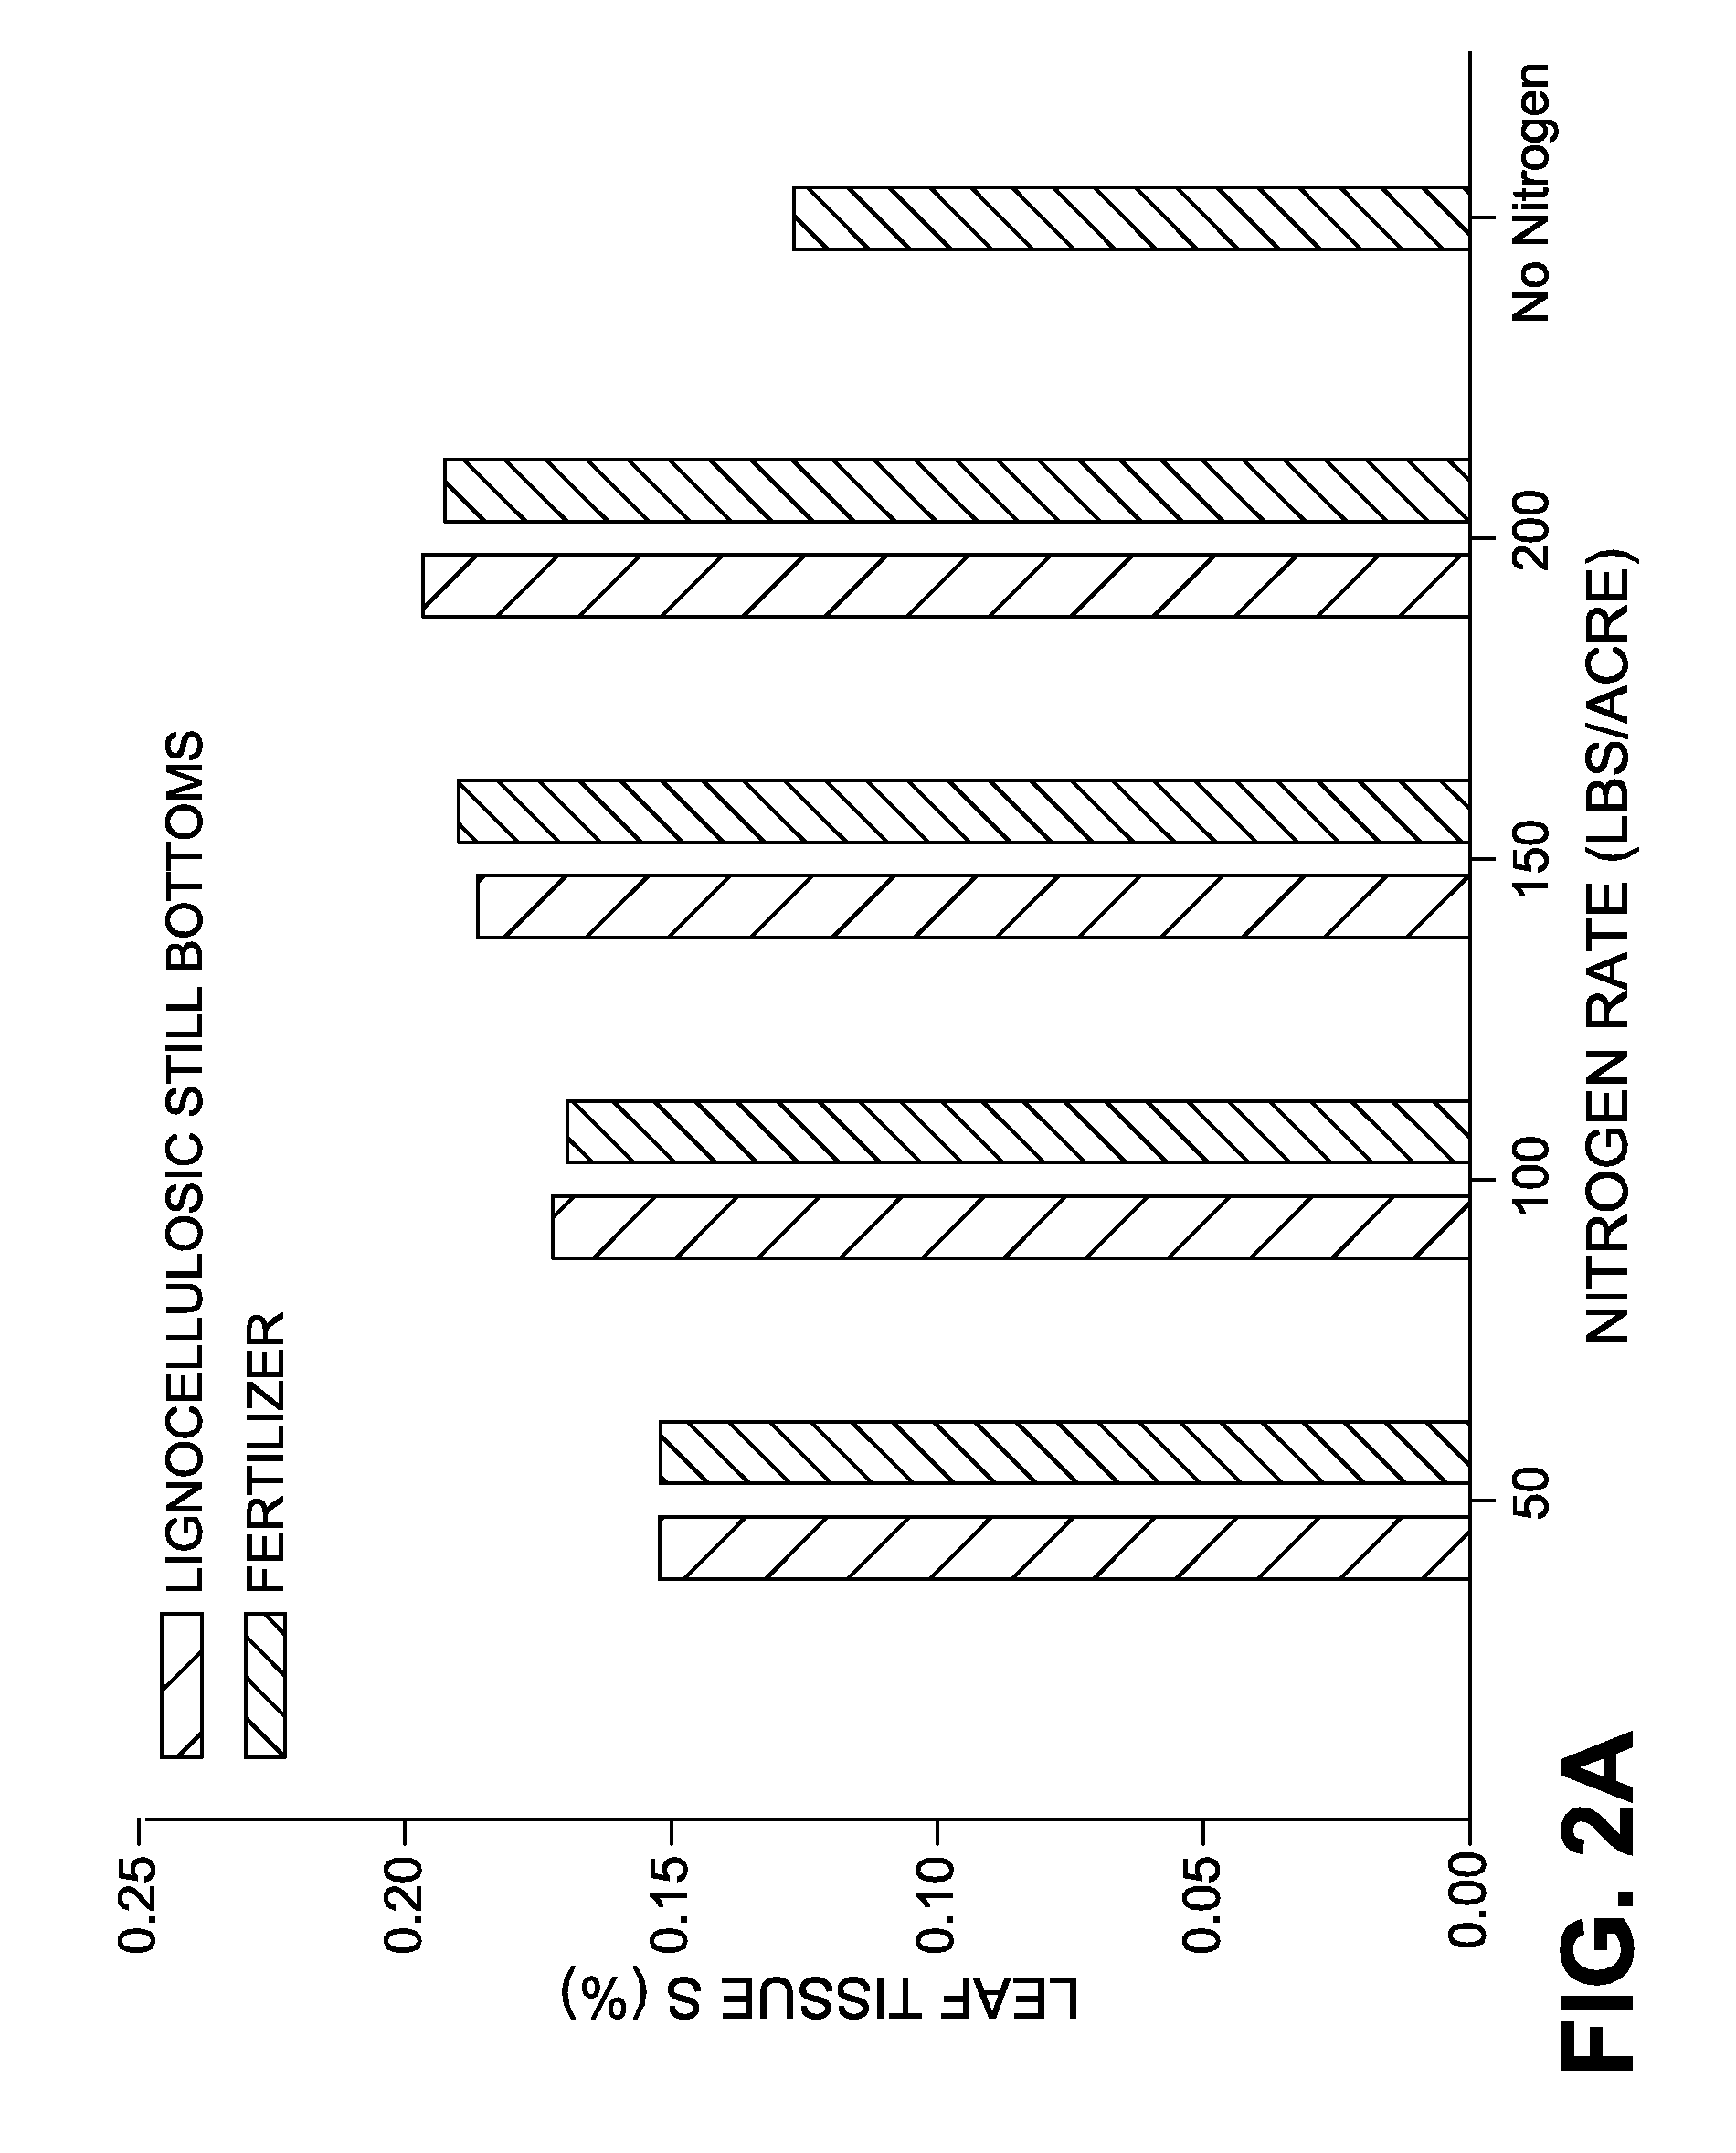 Method for producing a soil conditioning composition from a lignocellulosic conversion process